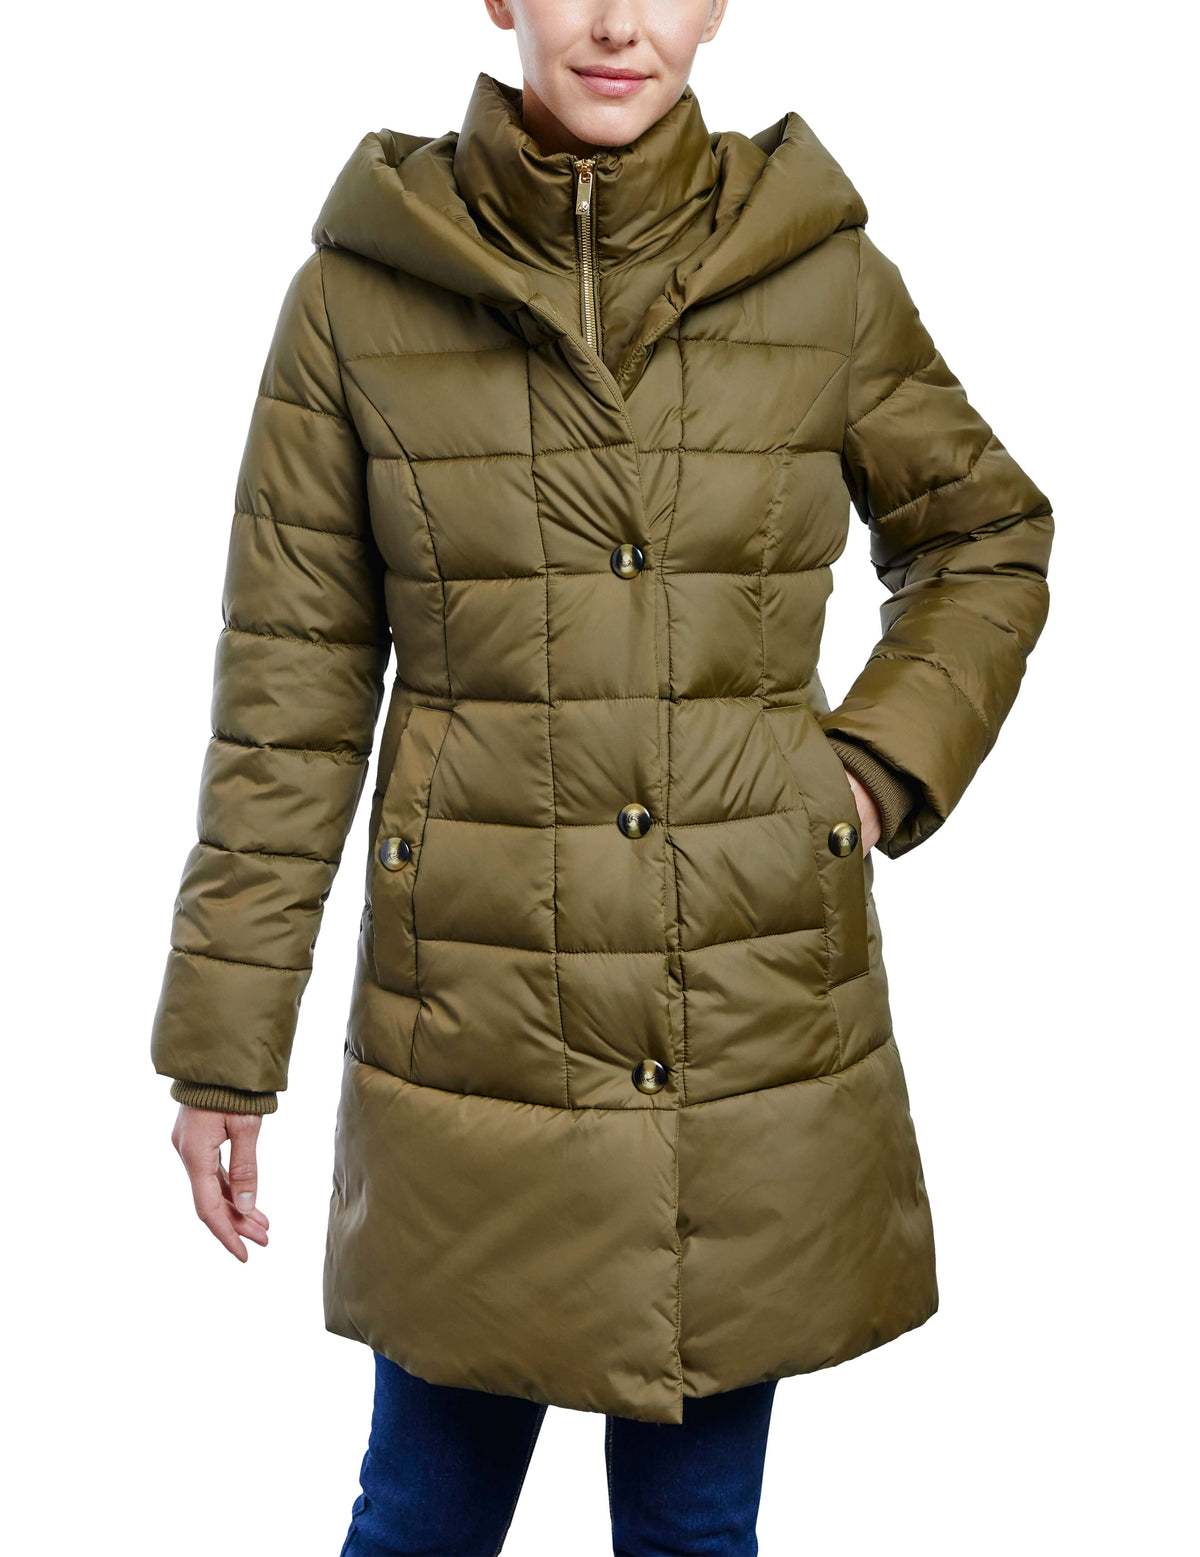 Anne Klein Green Consider It Snap Front Puffer Jacket - Clearance